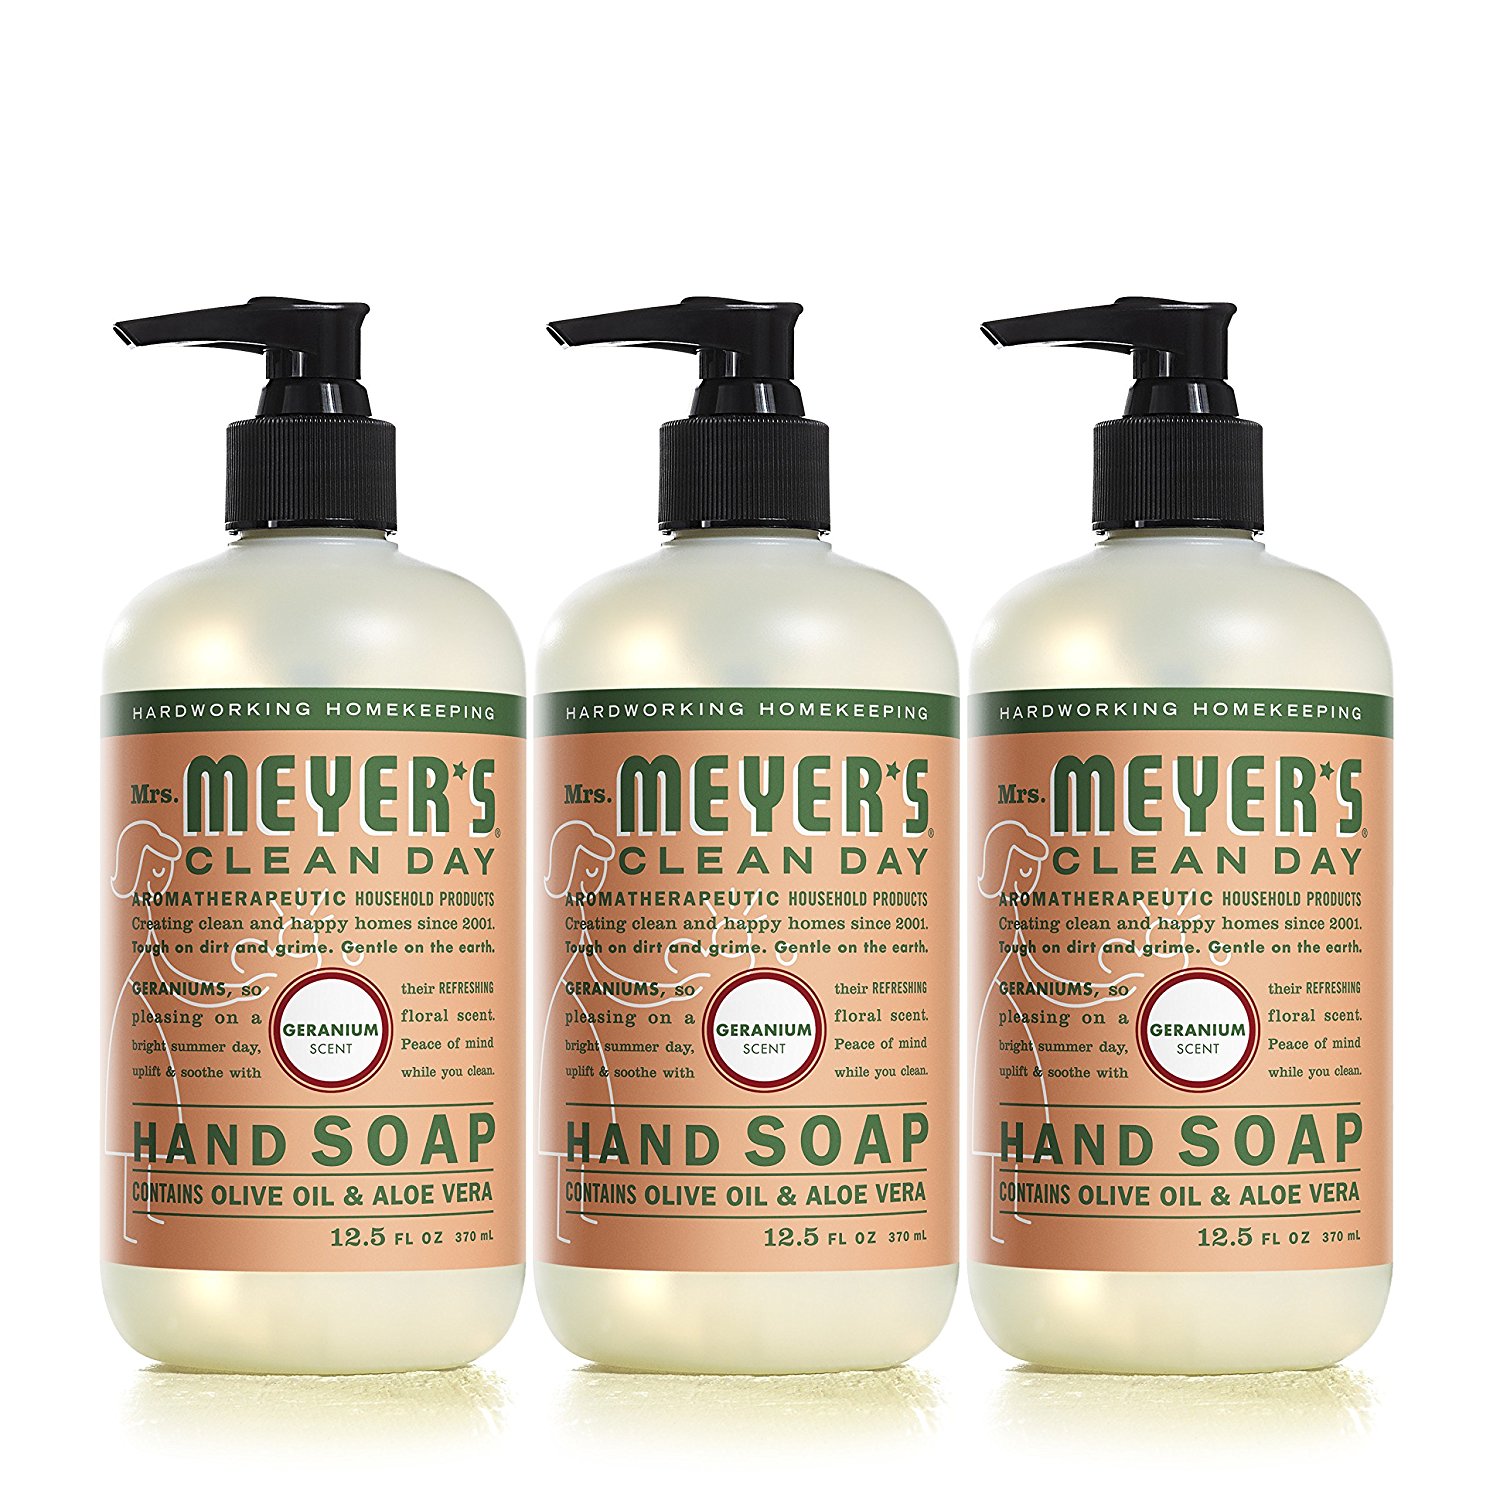 Mrs Meyers Hand Soap, Geranium, 3 Pack Only $7.70 Shipped!